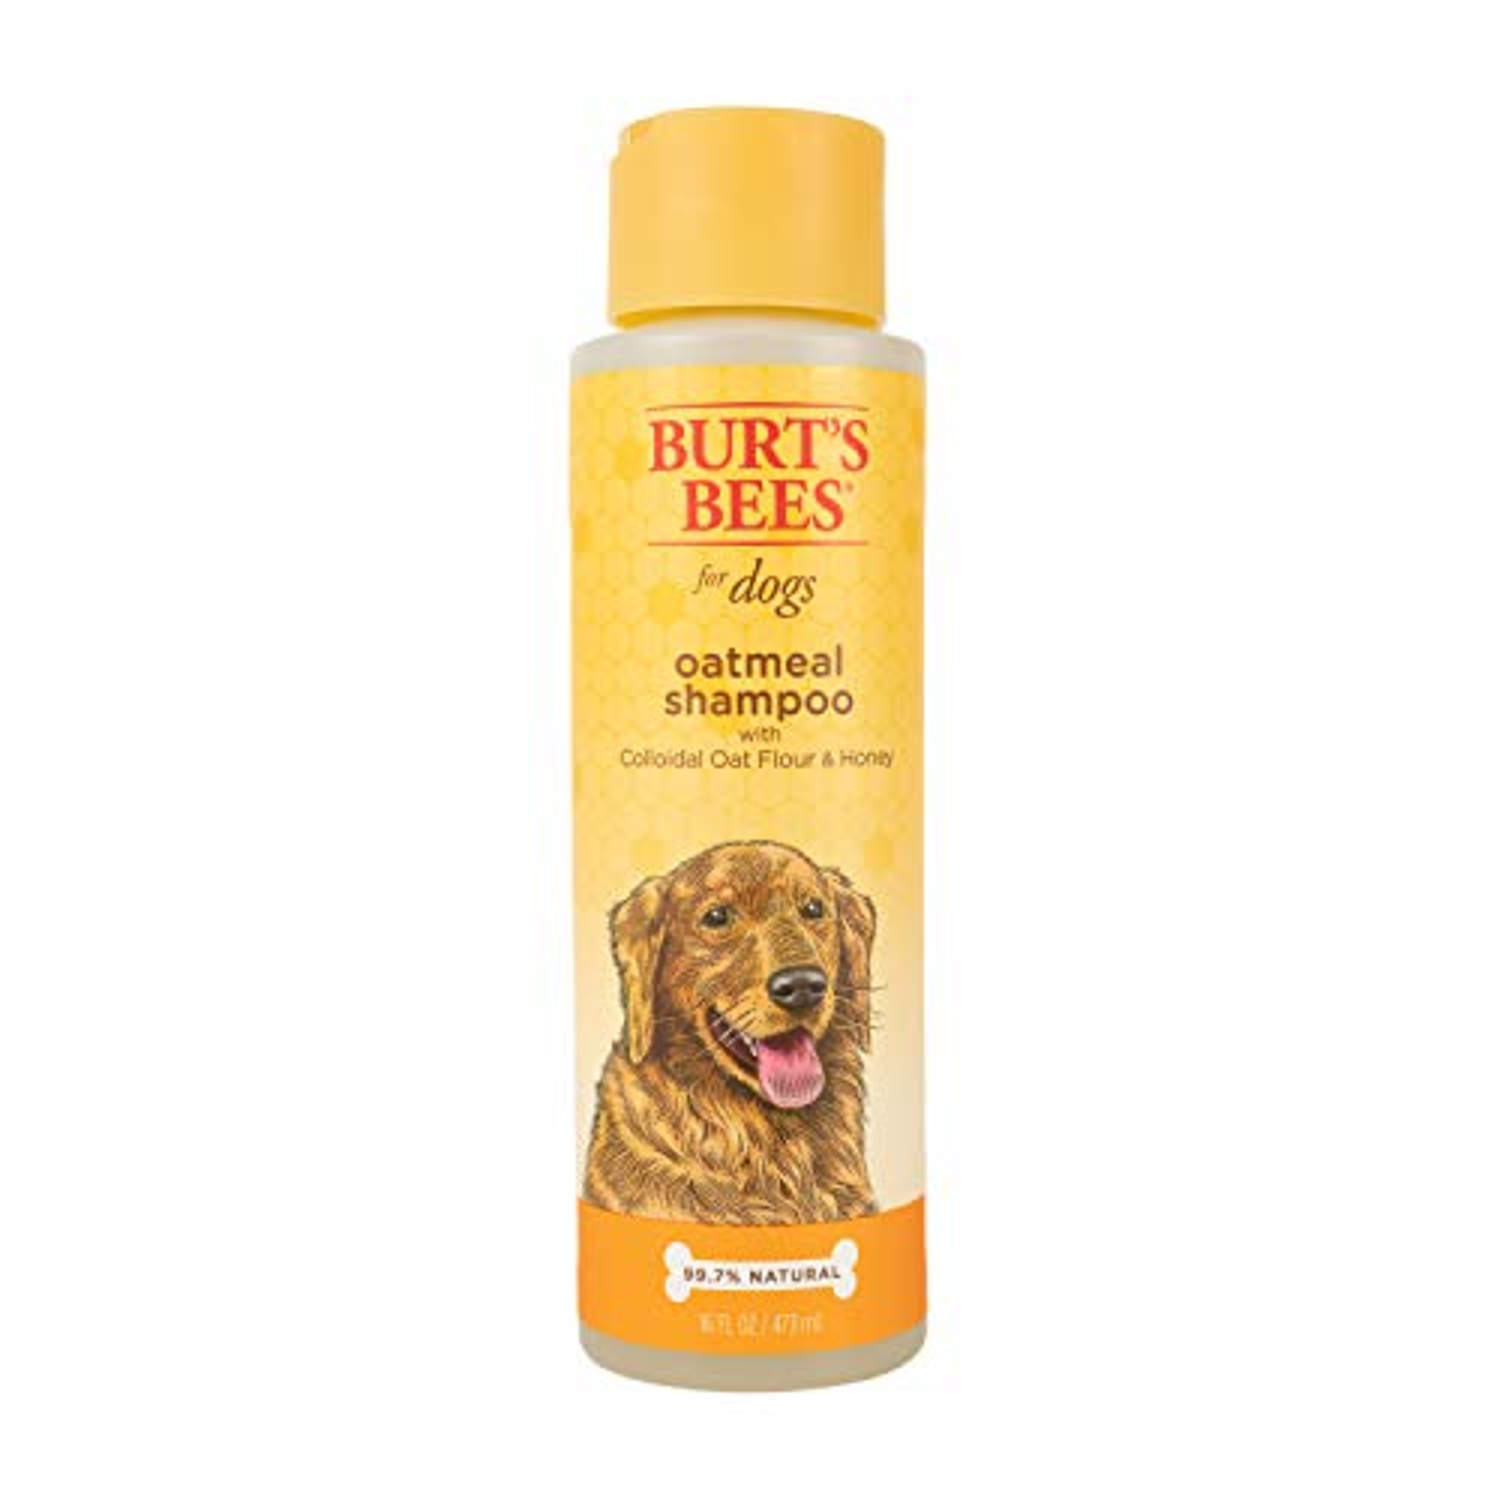 amazon, how often you bathe your dog depends on its breed